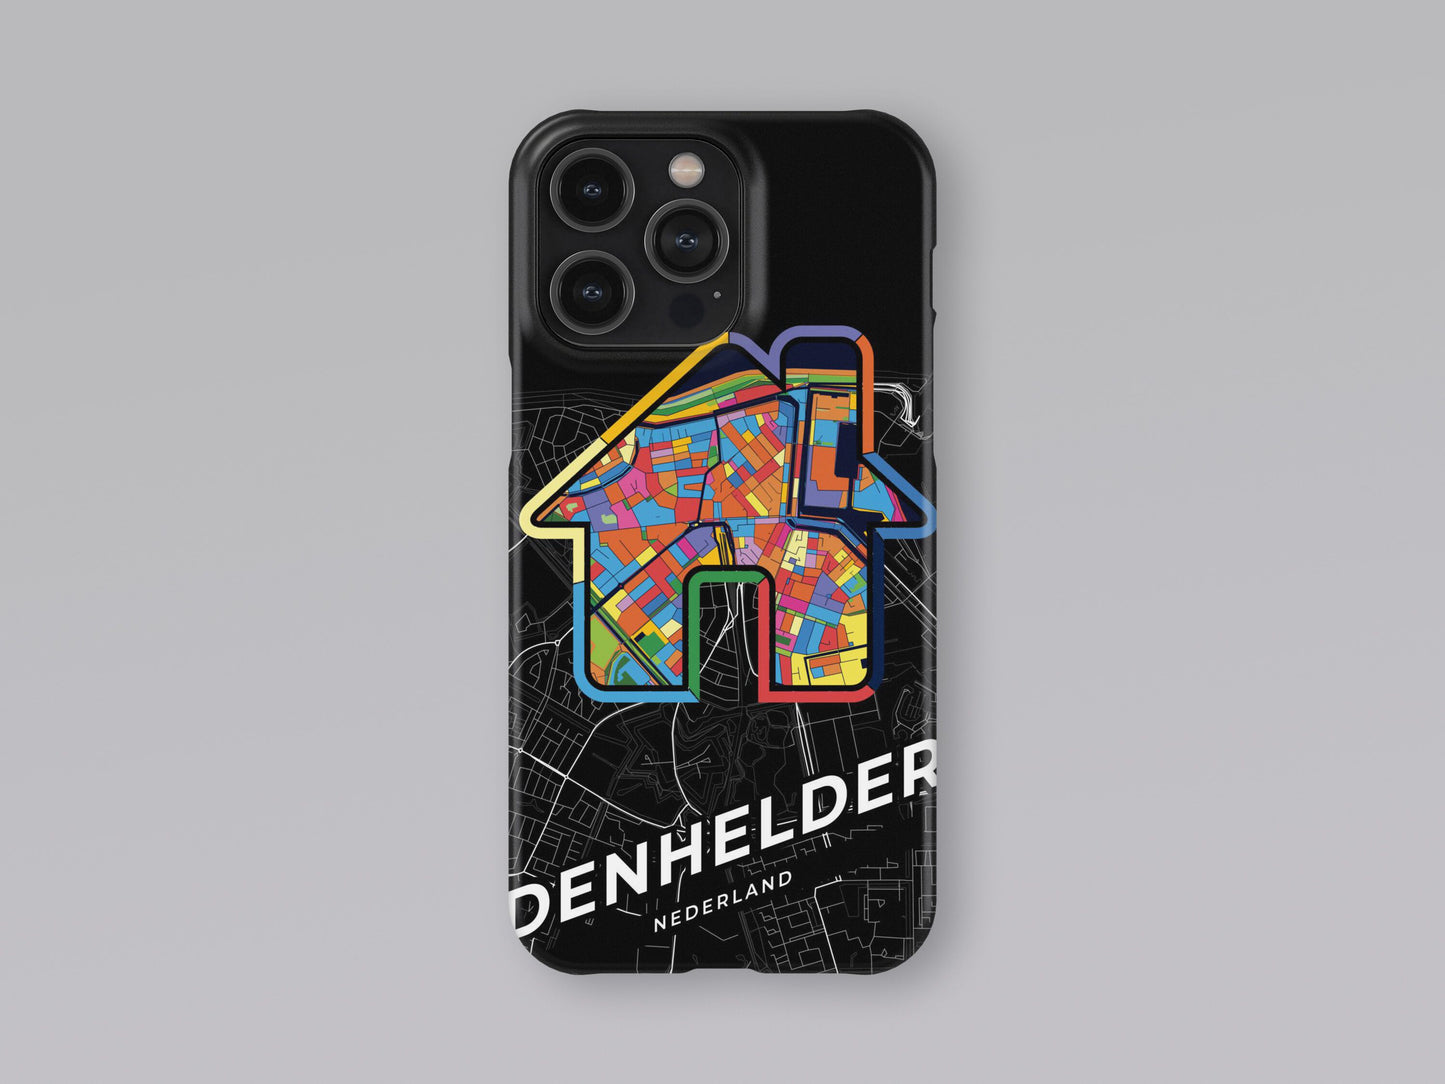 Den Helder Netherlands slim phone case with colorful icon. Birthday, wedding or housewarming gift. Couple match cases. 3